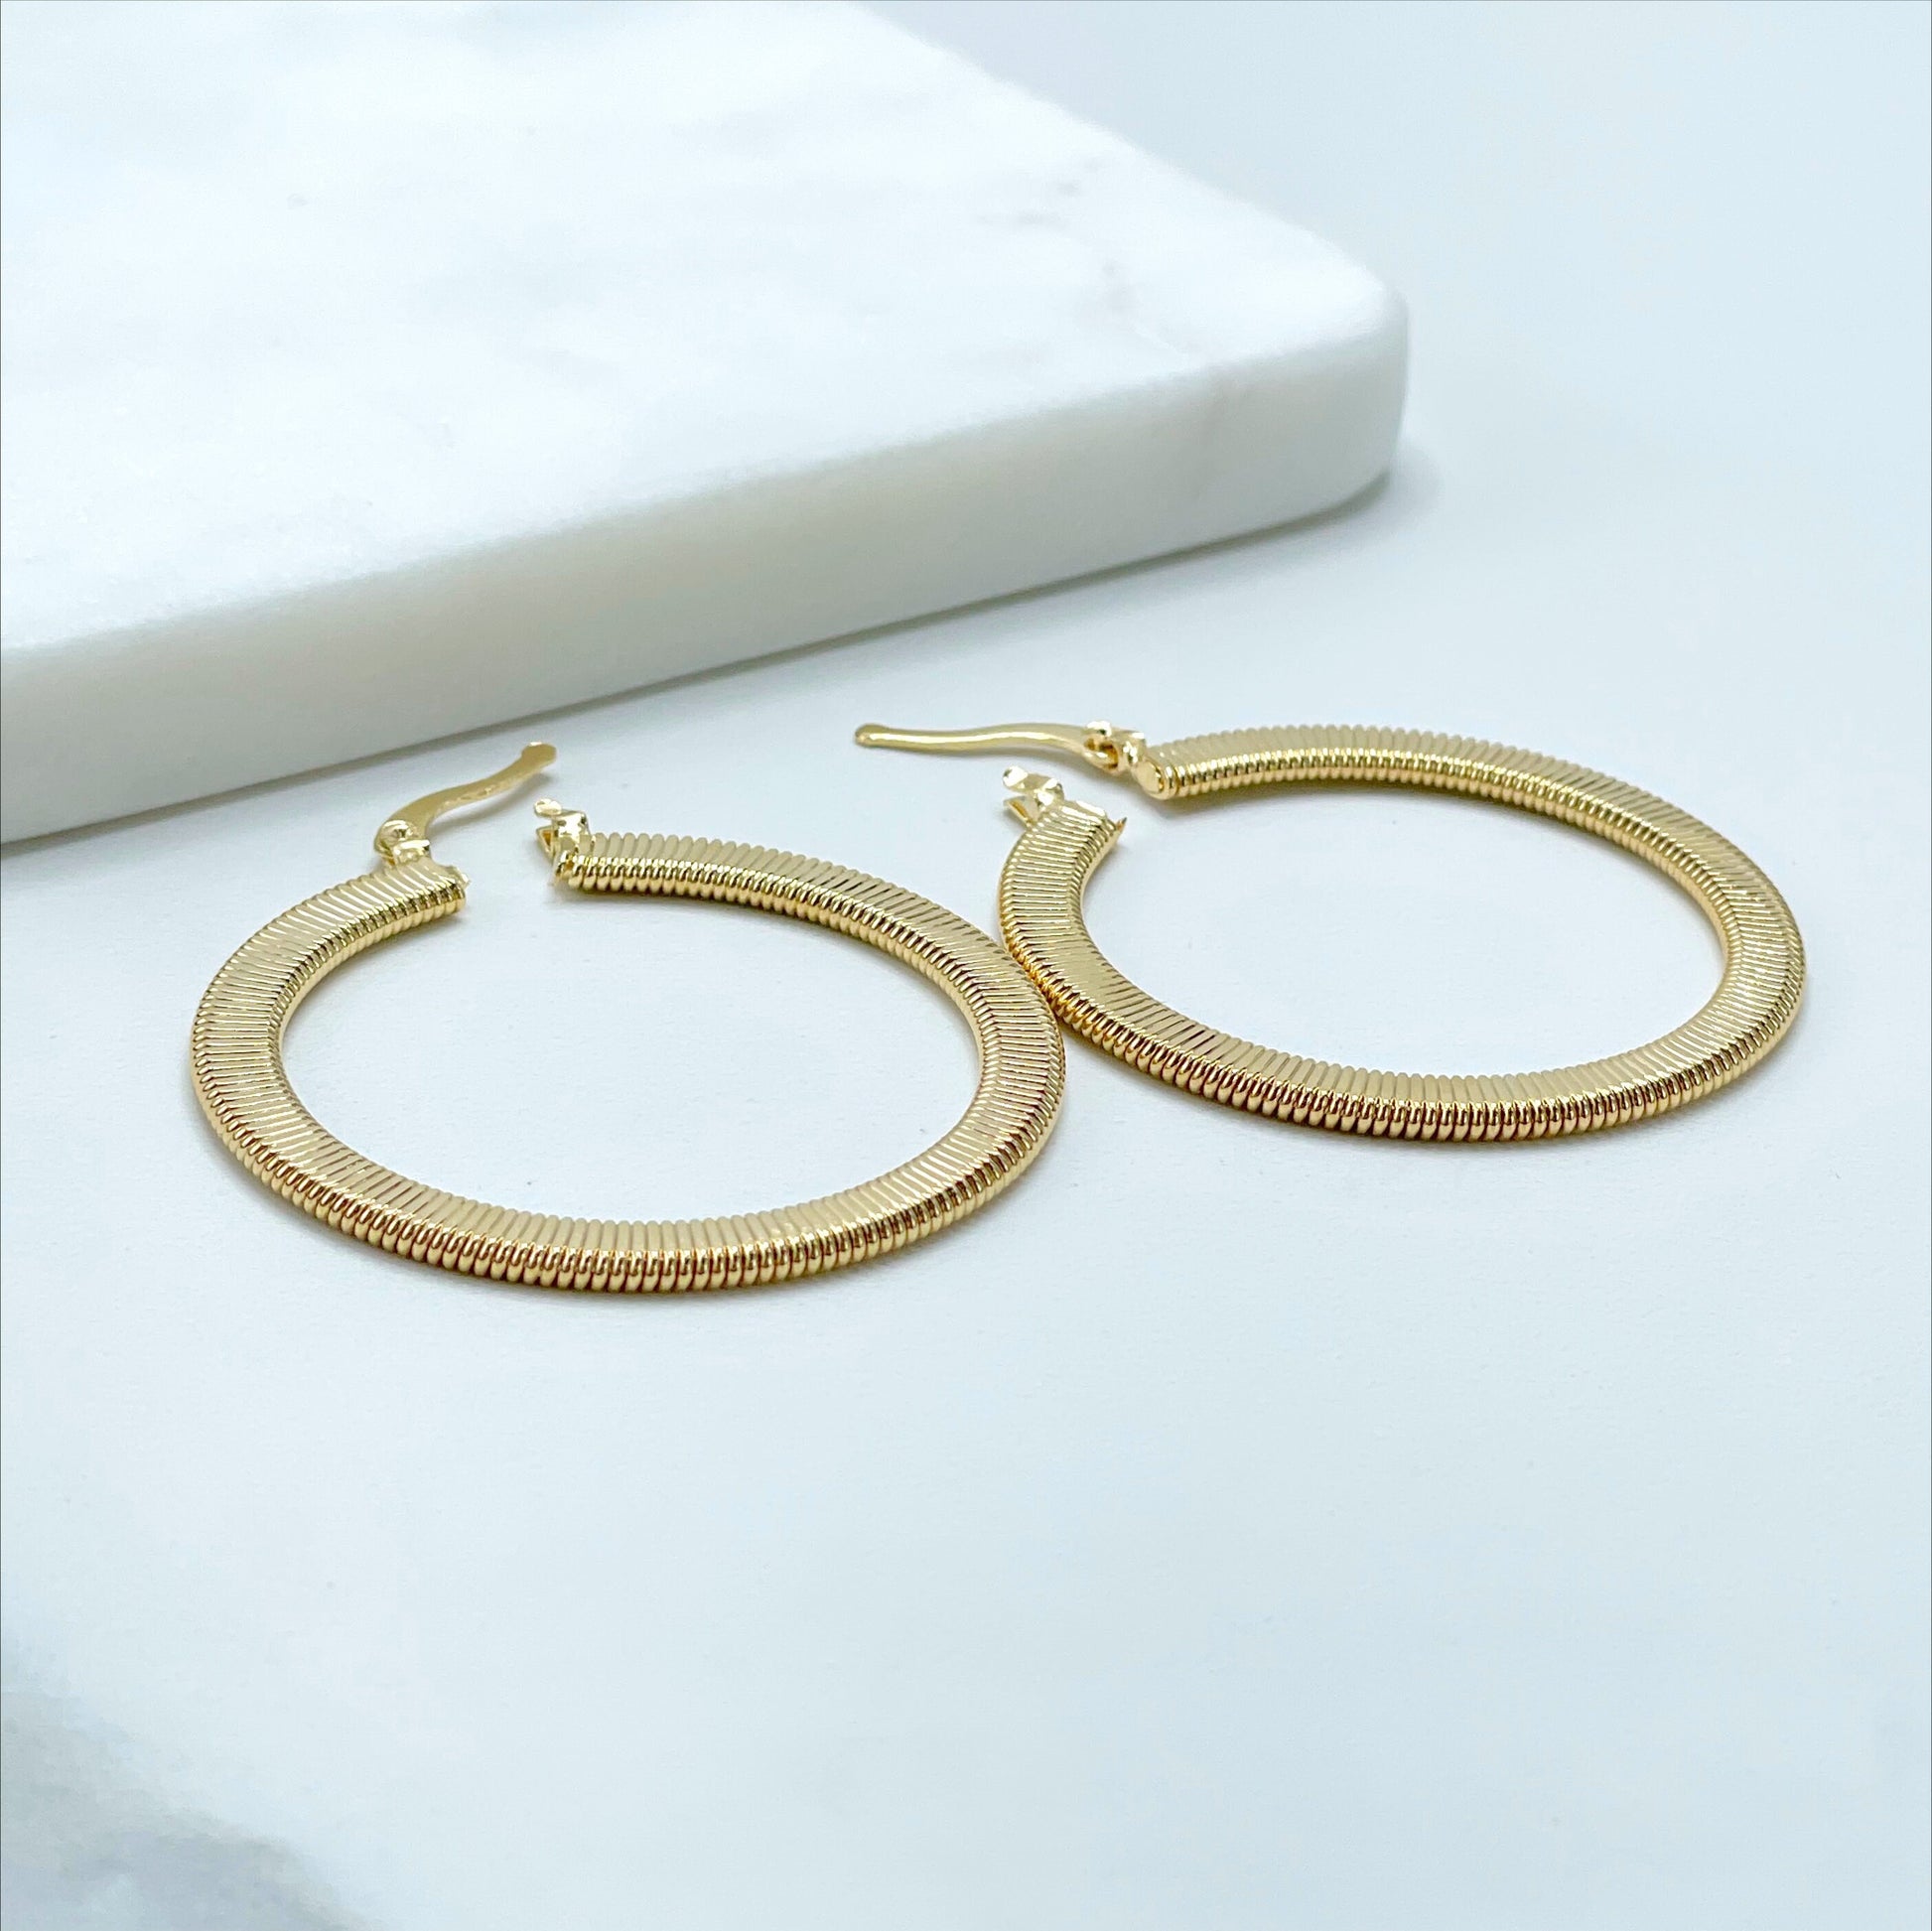 18k Gold Filled 45mm or 39mm Textured Hoops Earrings, Match Herringbone Design Wholesale Jewelry Making Supplies